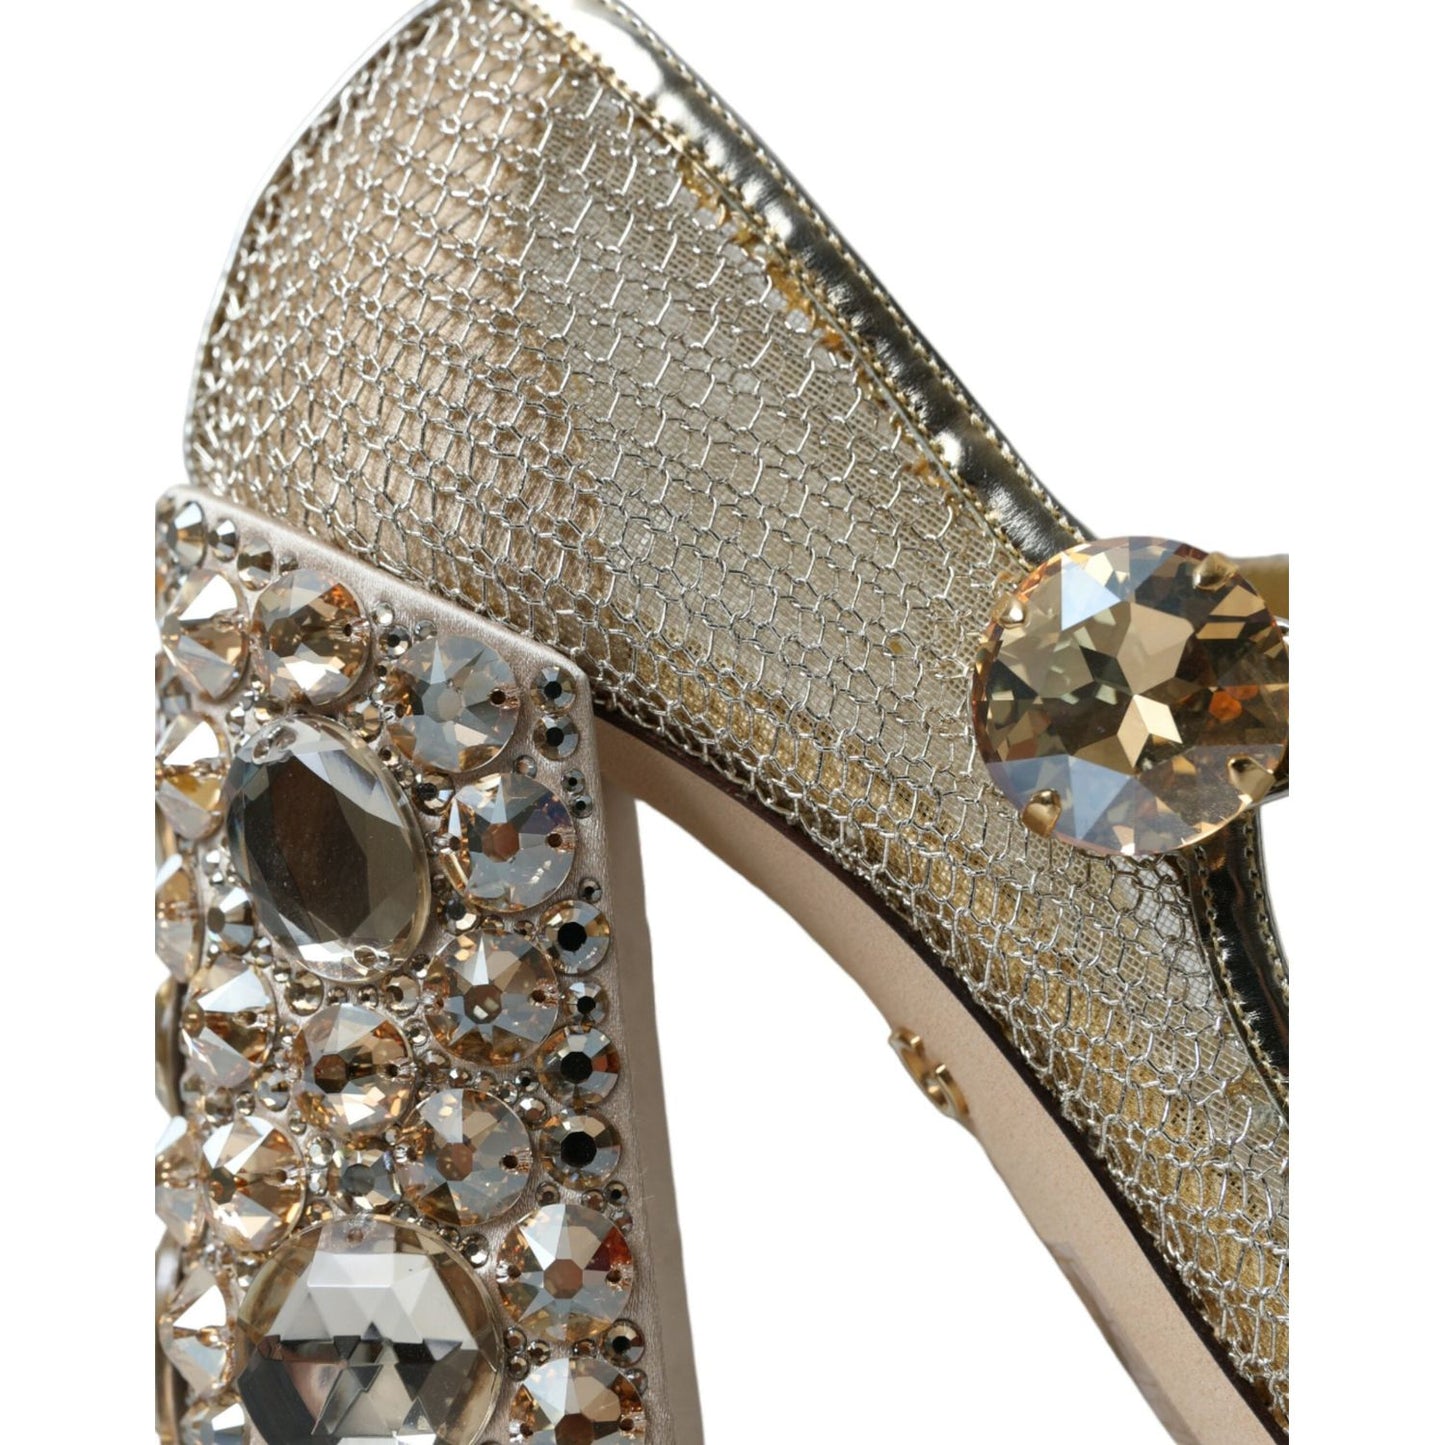 Dolce & Gabbana Gold Mesh Crystal Mary Jane Pumps Heels Shoes gold-mesh-crystal-mary-jane-pumps-heels-shoes